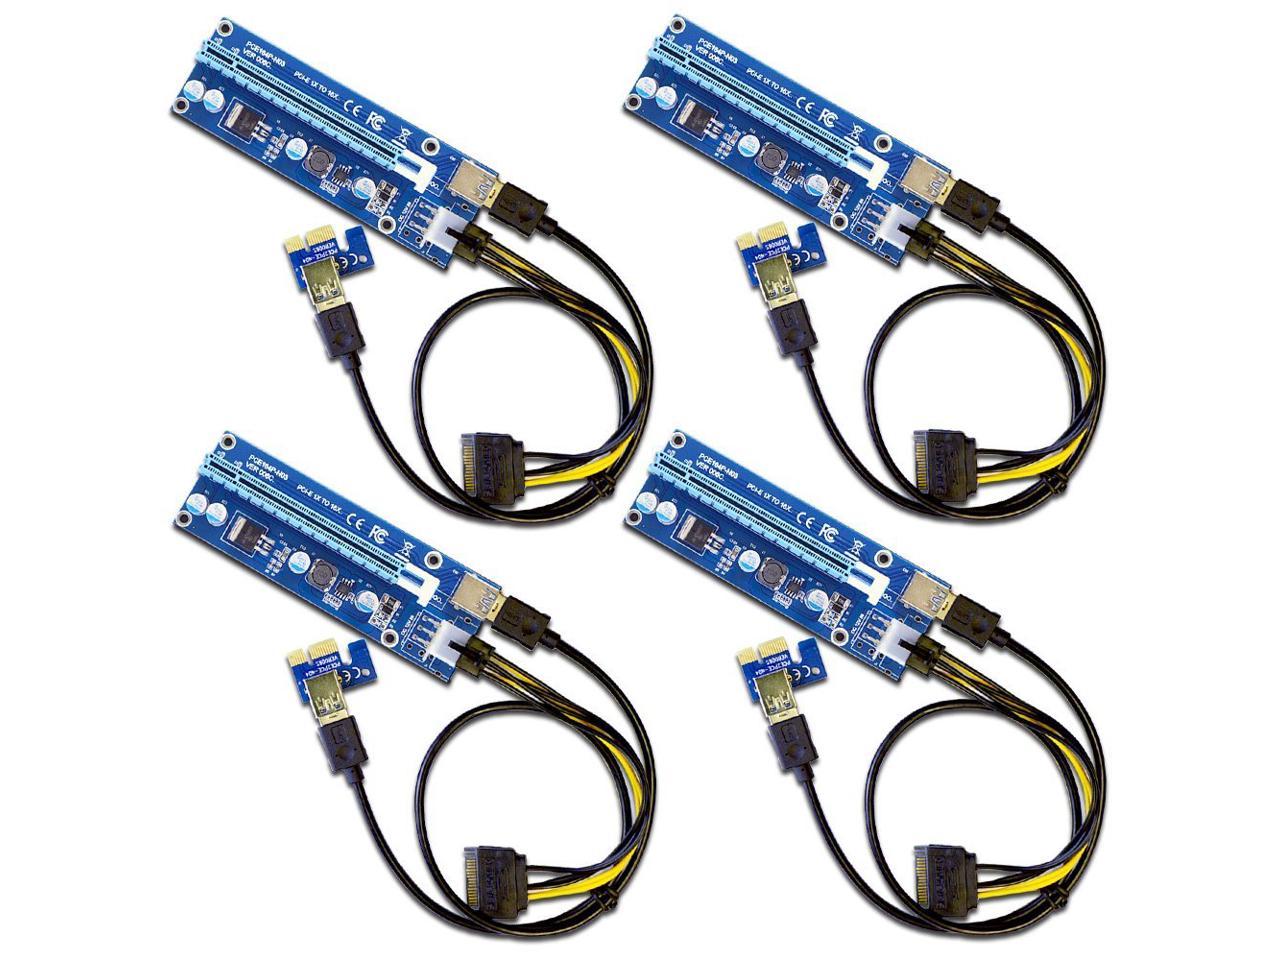 USB 3.0 Pci PCI-E Express 1x To 16x Extender Riser Card Adapter Power Cable US K 